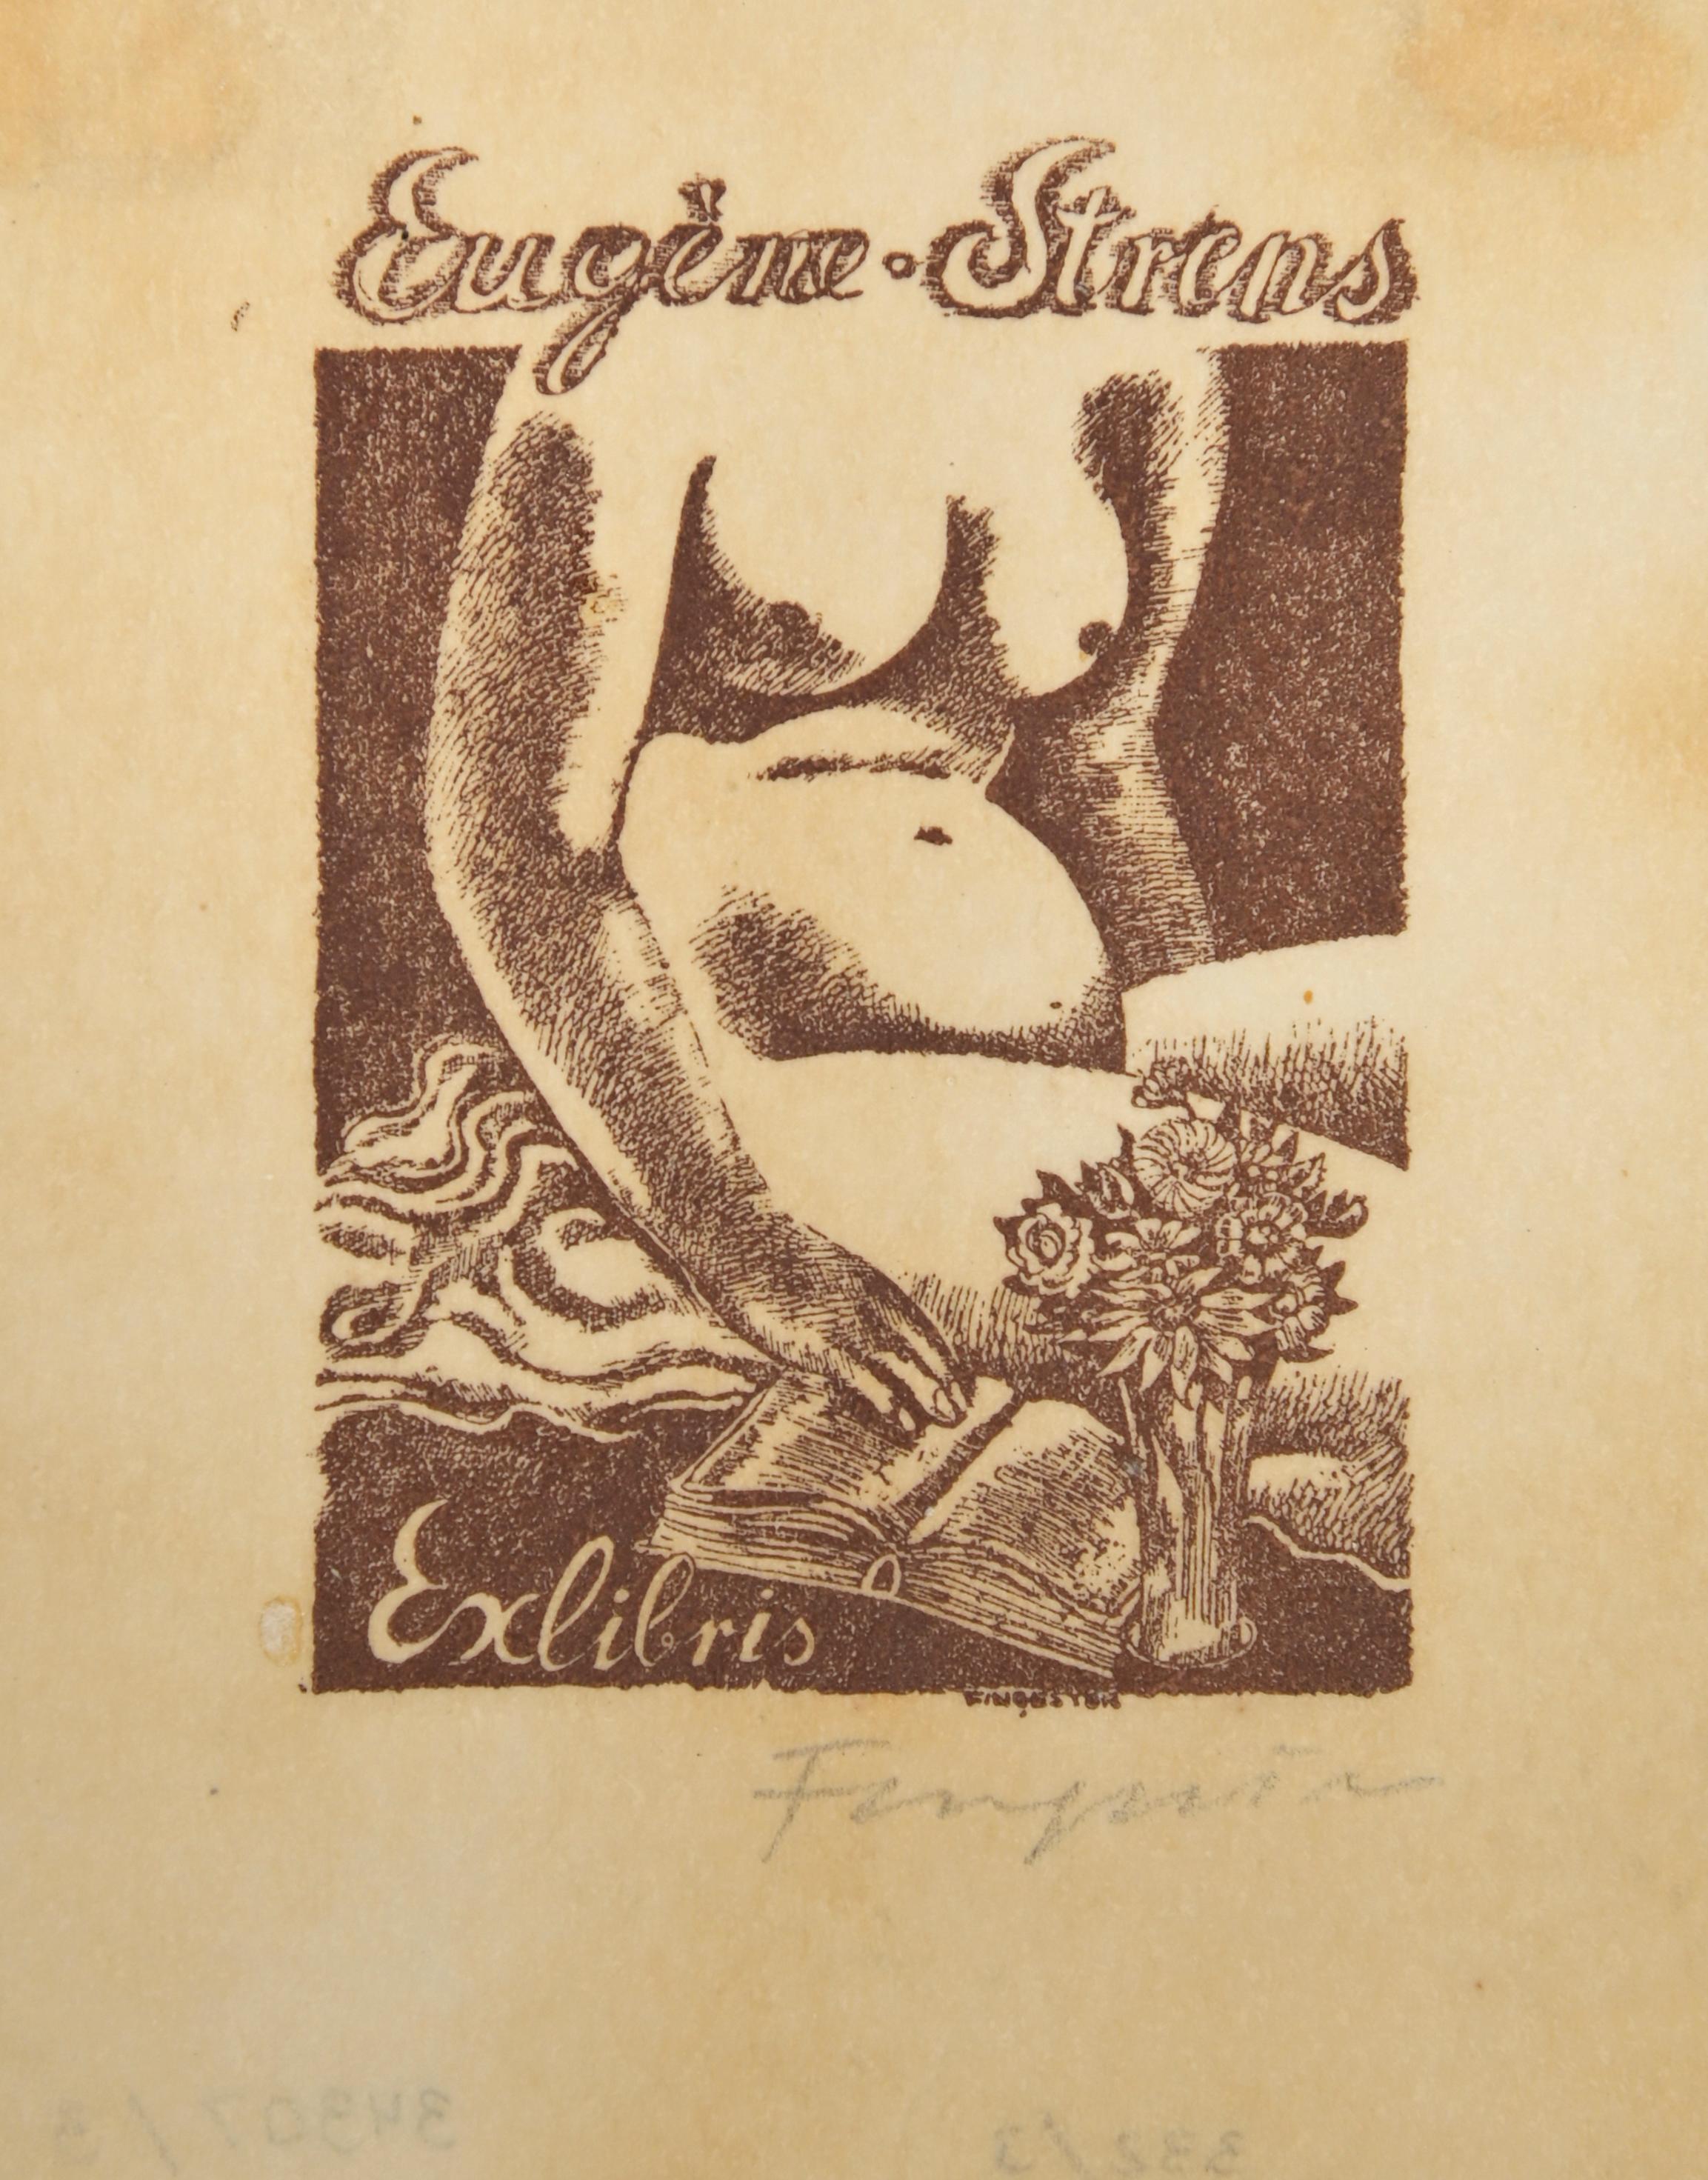 Ex Libris - Eugène Strens is a woodcut print created by  Michel Fingesten.

Hand Signed on the lower right margin.

Good conditions.

Michel Fingesten (1884 - 1943) was a Czech painter and engraver of Jewish origin. He is considered one of the